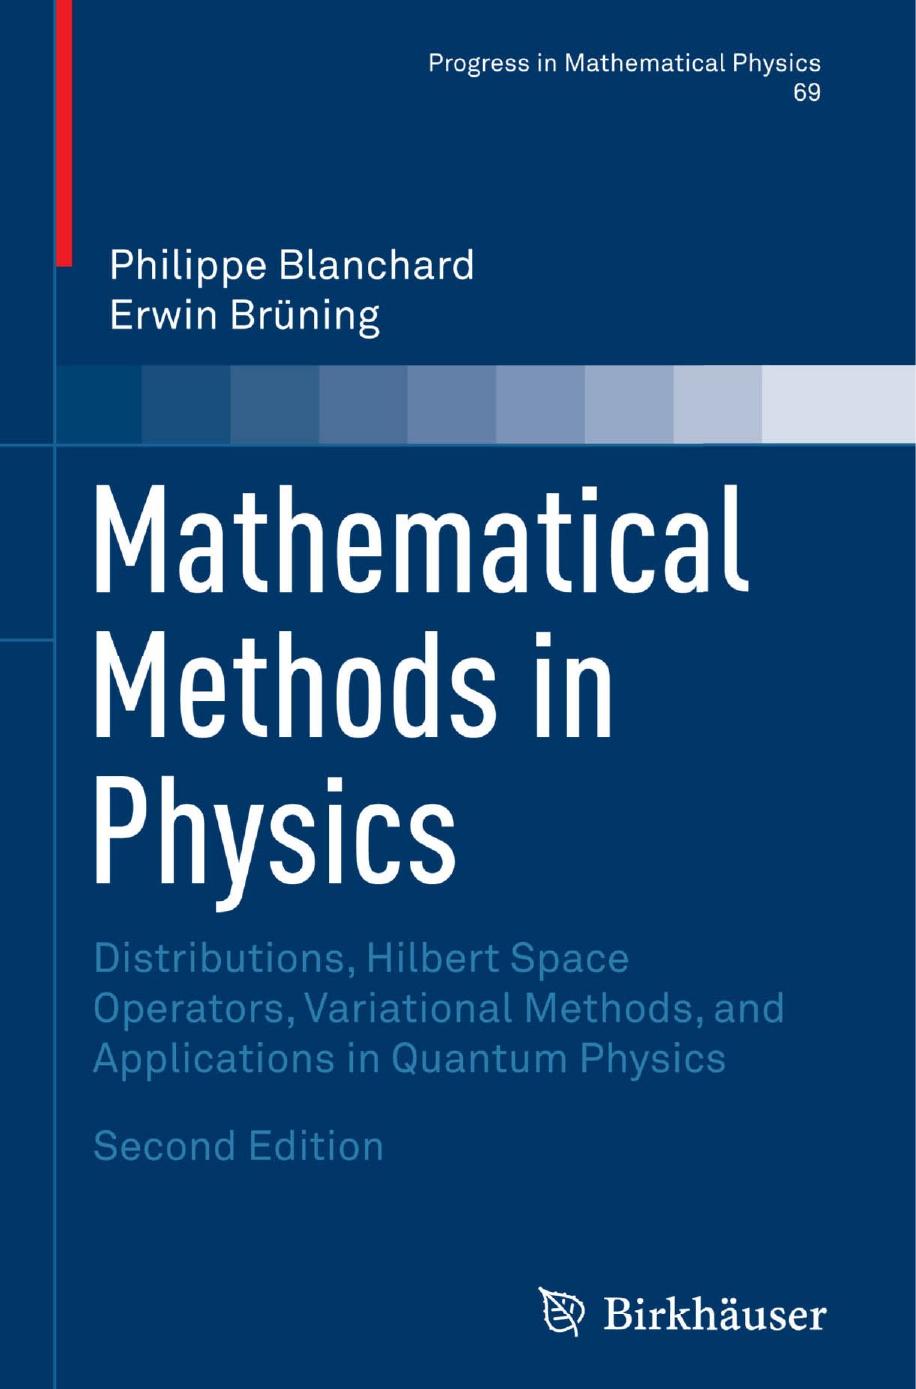 Mathematical Methods in Physics  Distributions, Hilbert Space Operators, Variational 2013  ( PDFDrive.com ) (1)